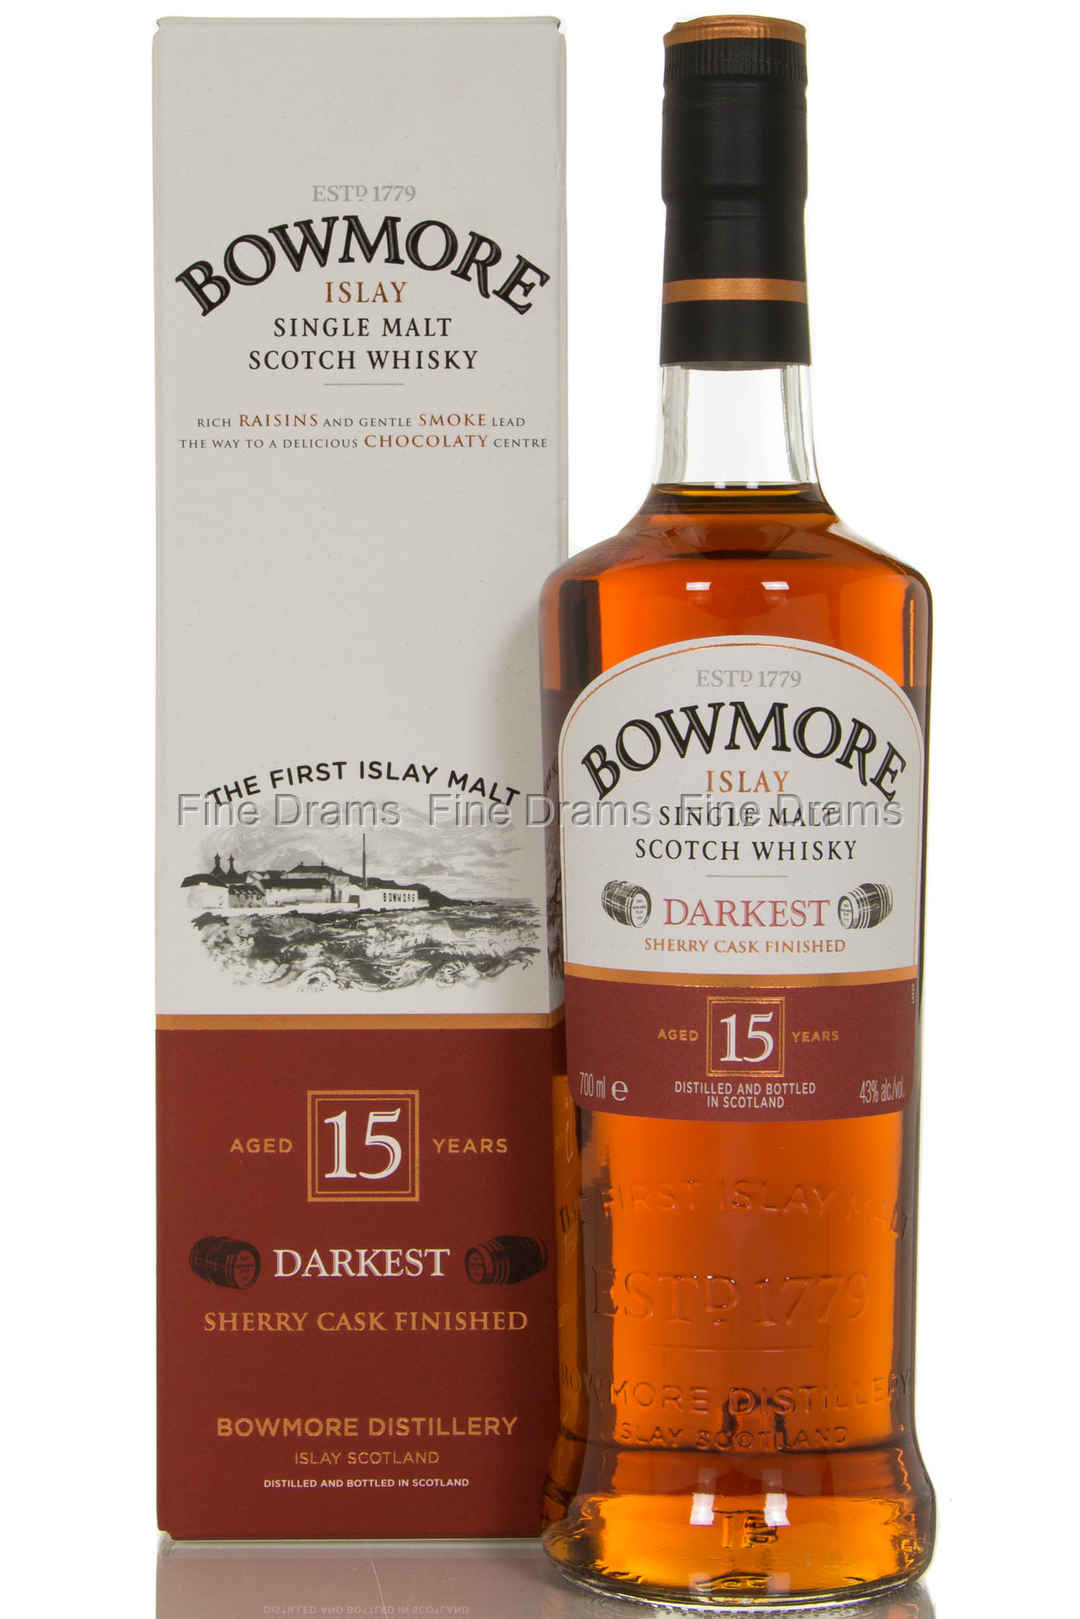 Buy Bowmore 15 Year Old Darkest Scotch Whisky Online | The 